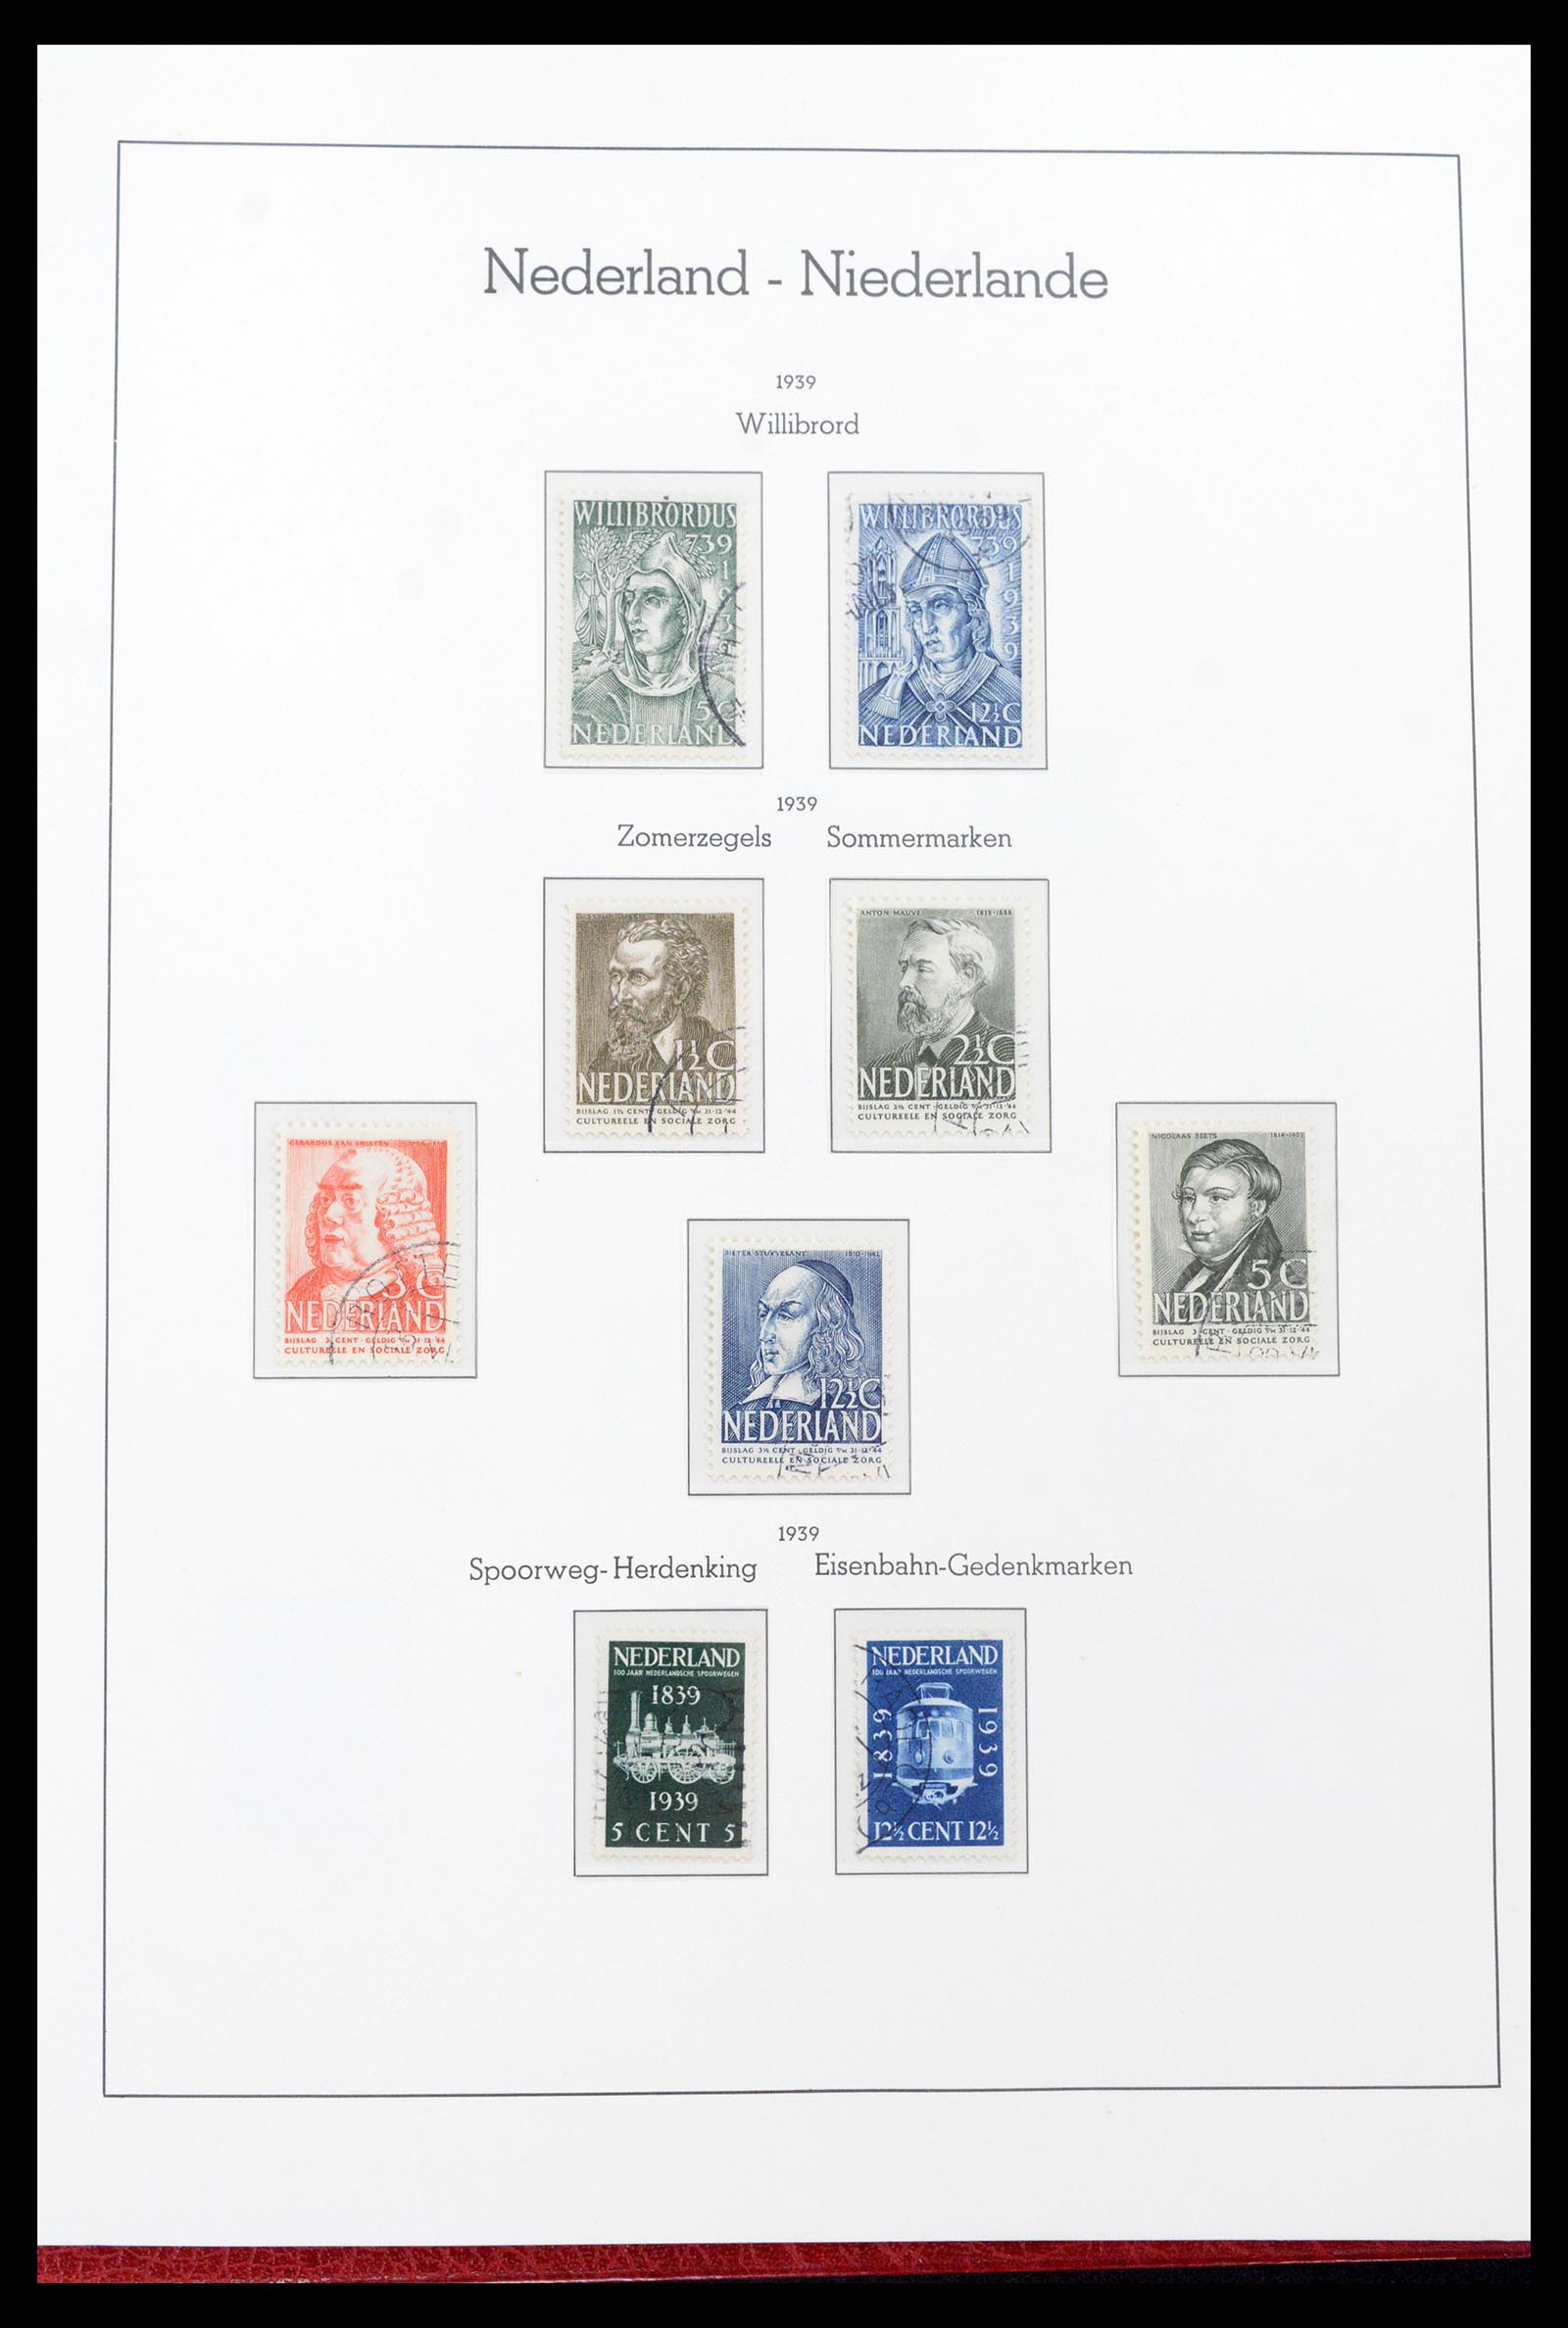 37290 025 - Stamp collection 37290 Netherlands 1852-1945.